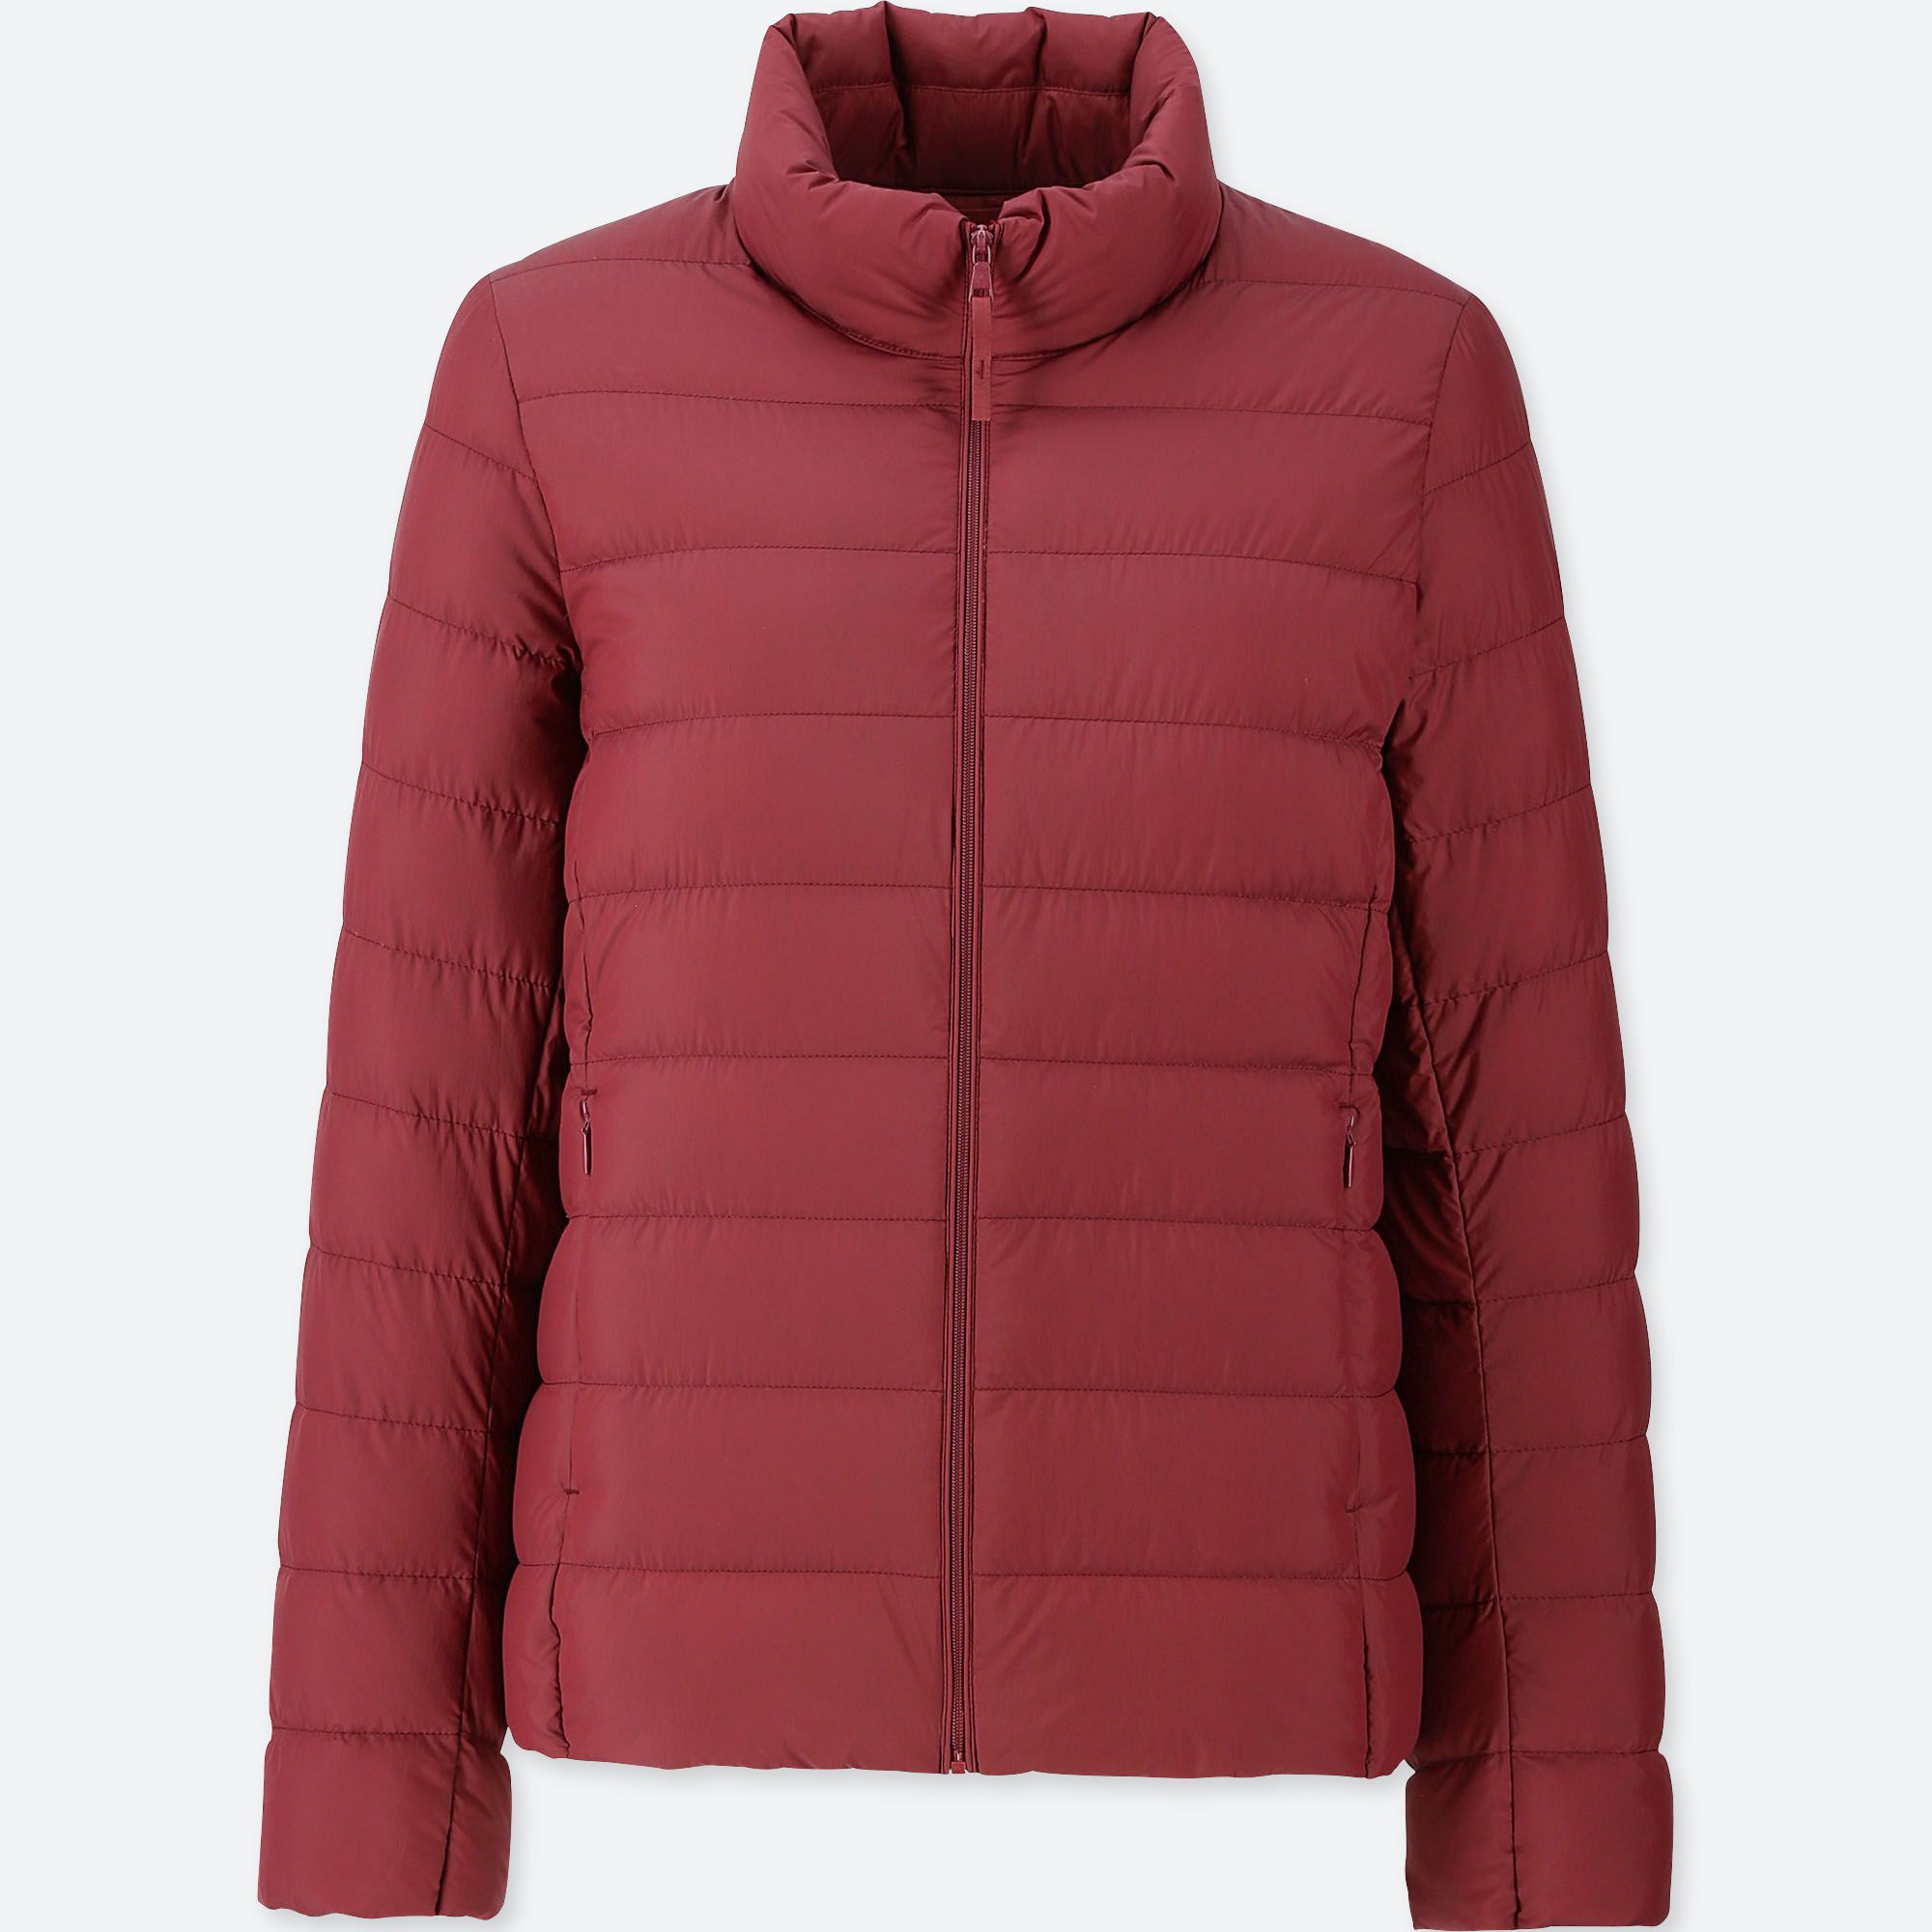 Down Jacket Guide by UNIQLO